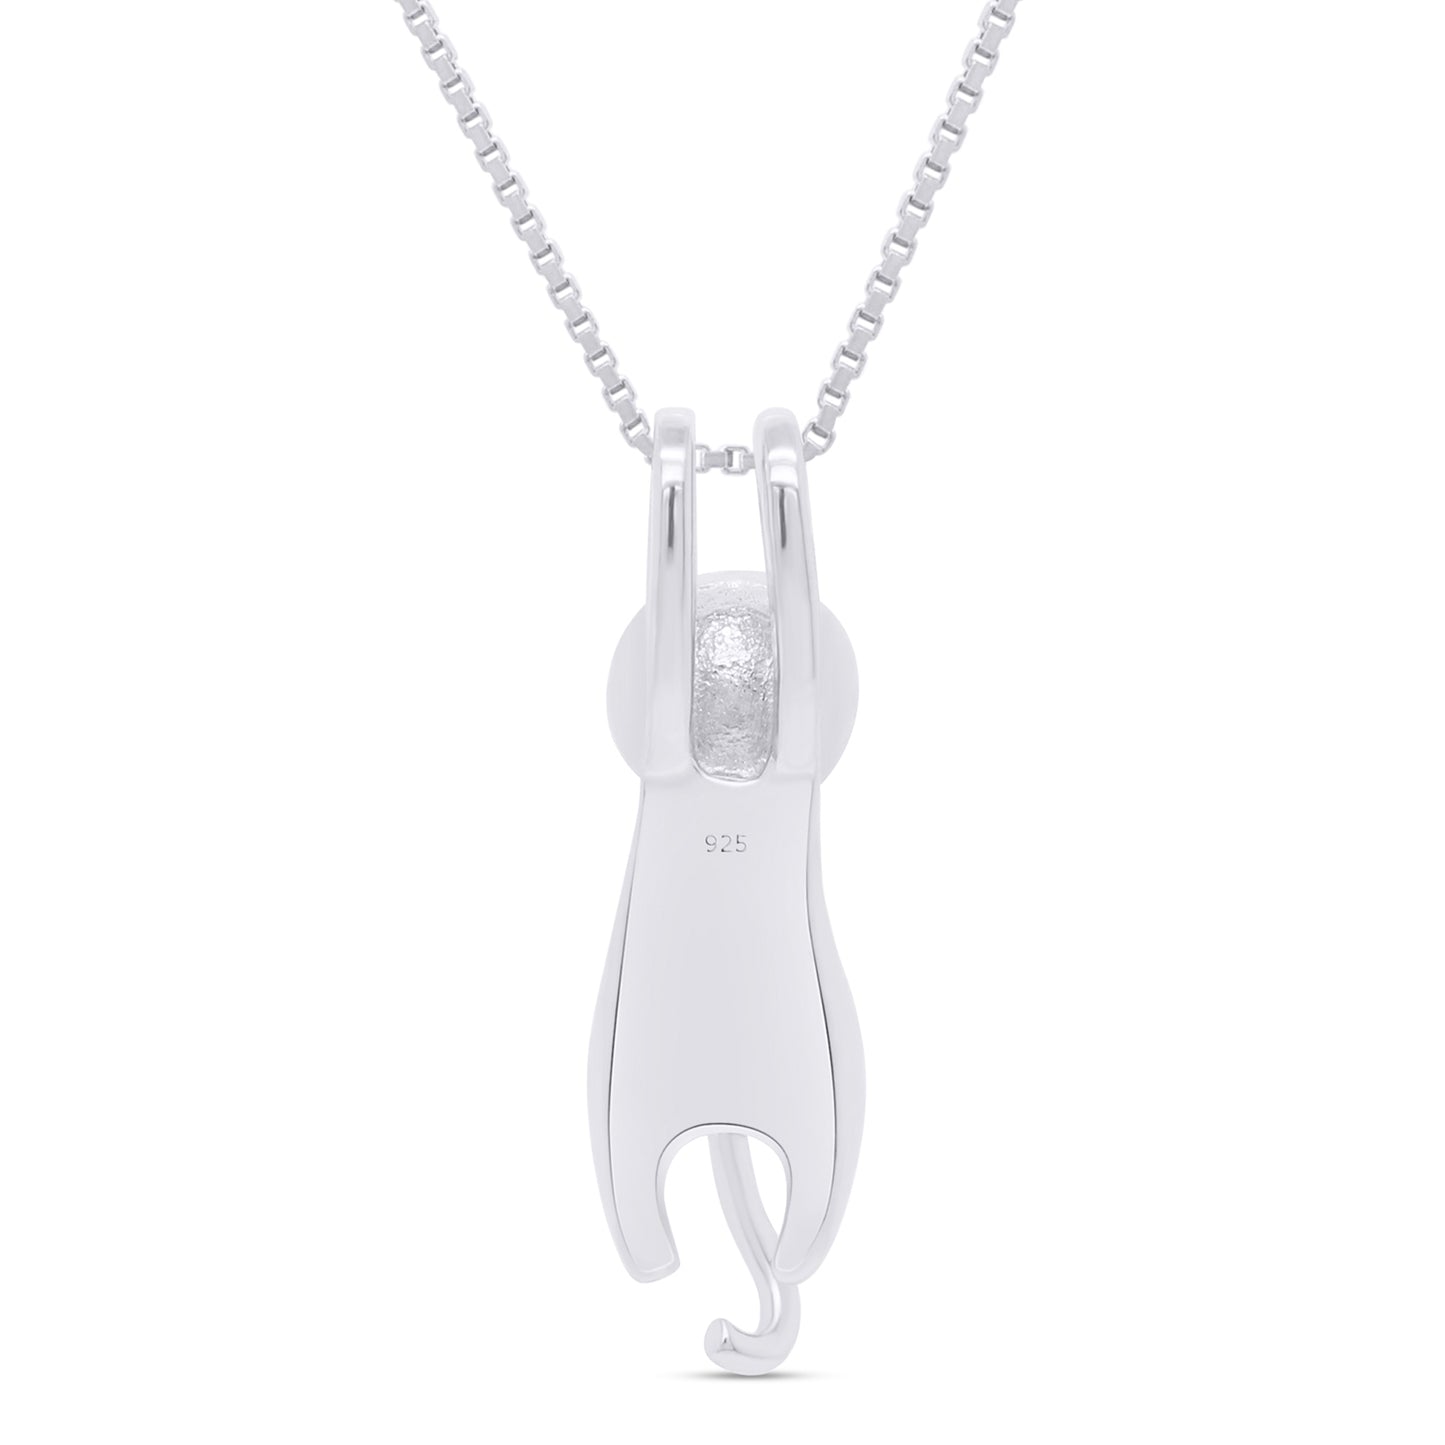 Flying Hanging Cat Pendant Necklace For Women In 925 Sterling Silver